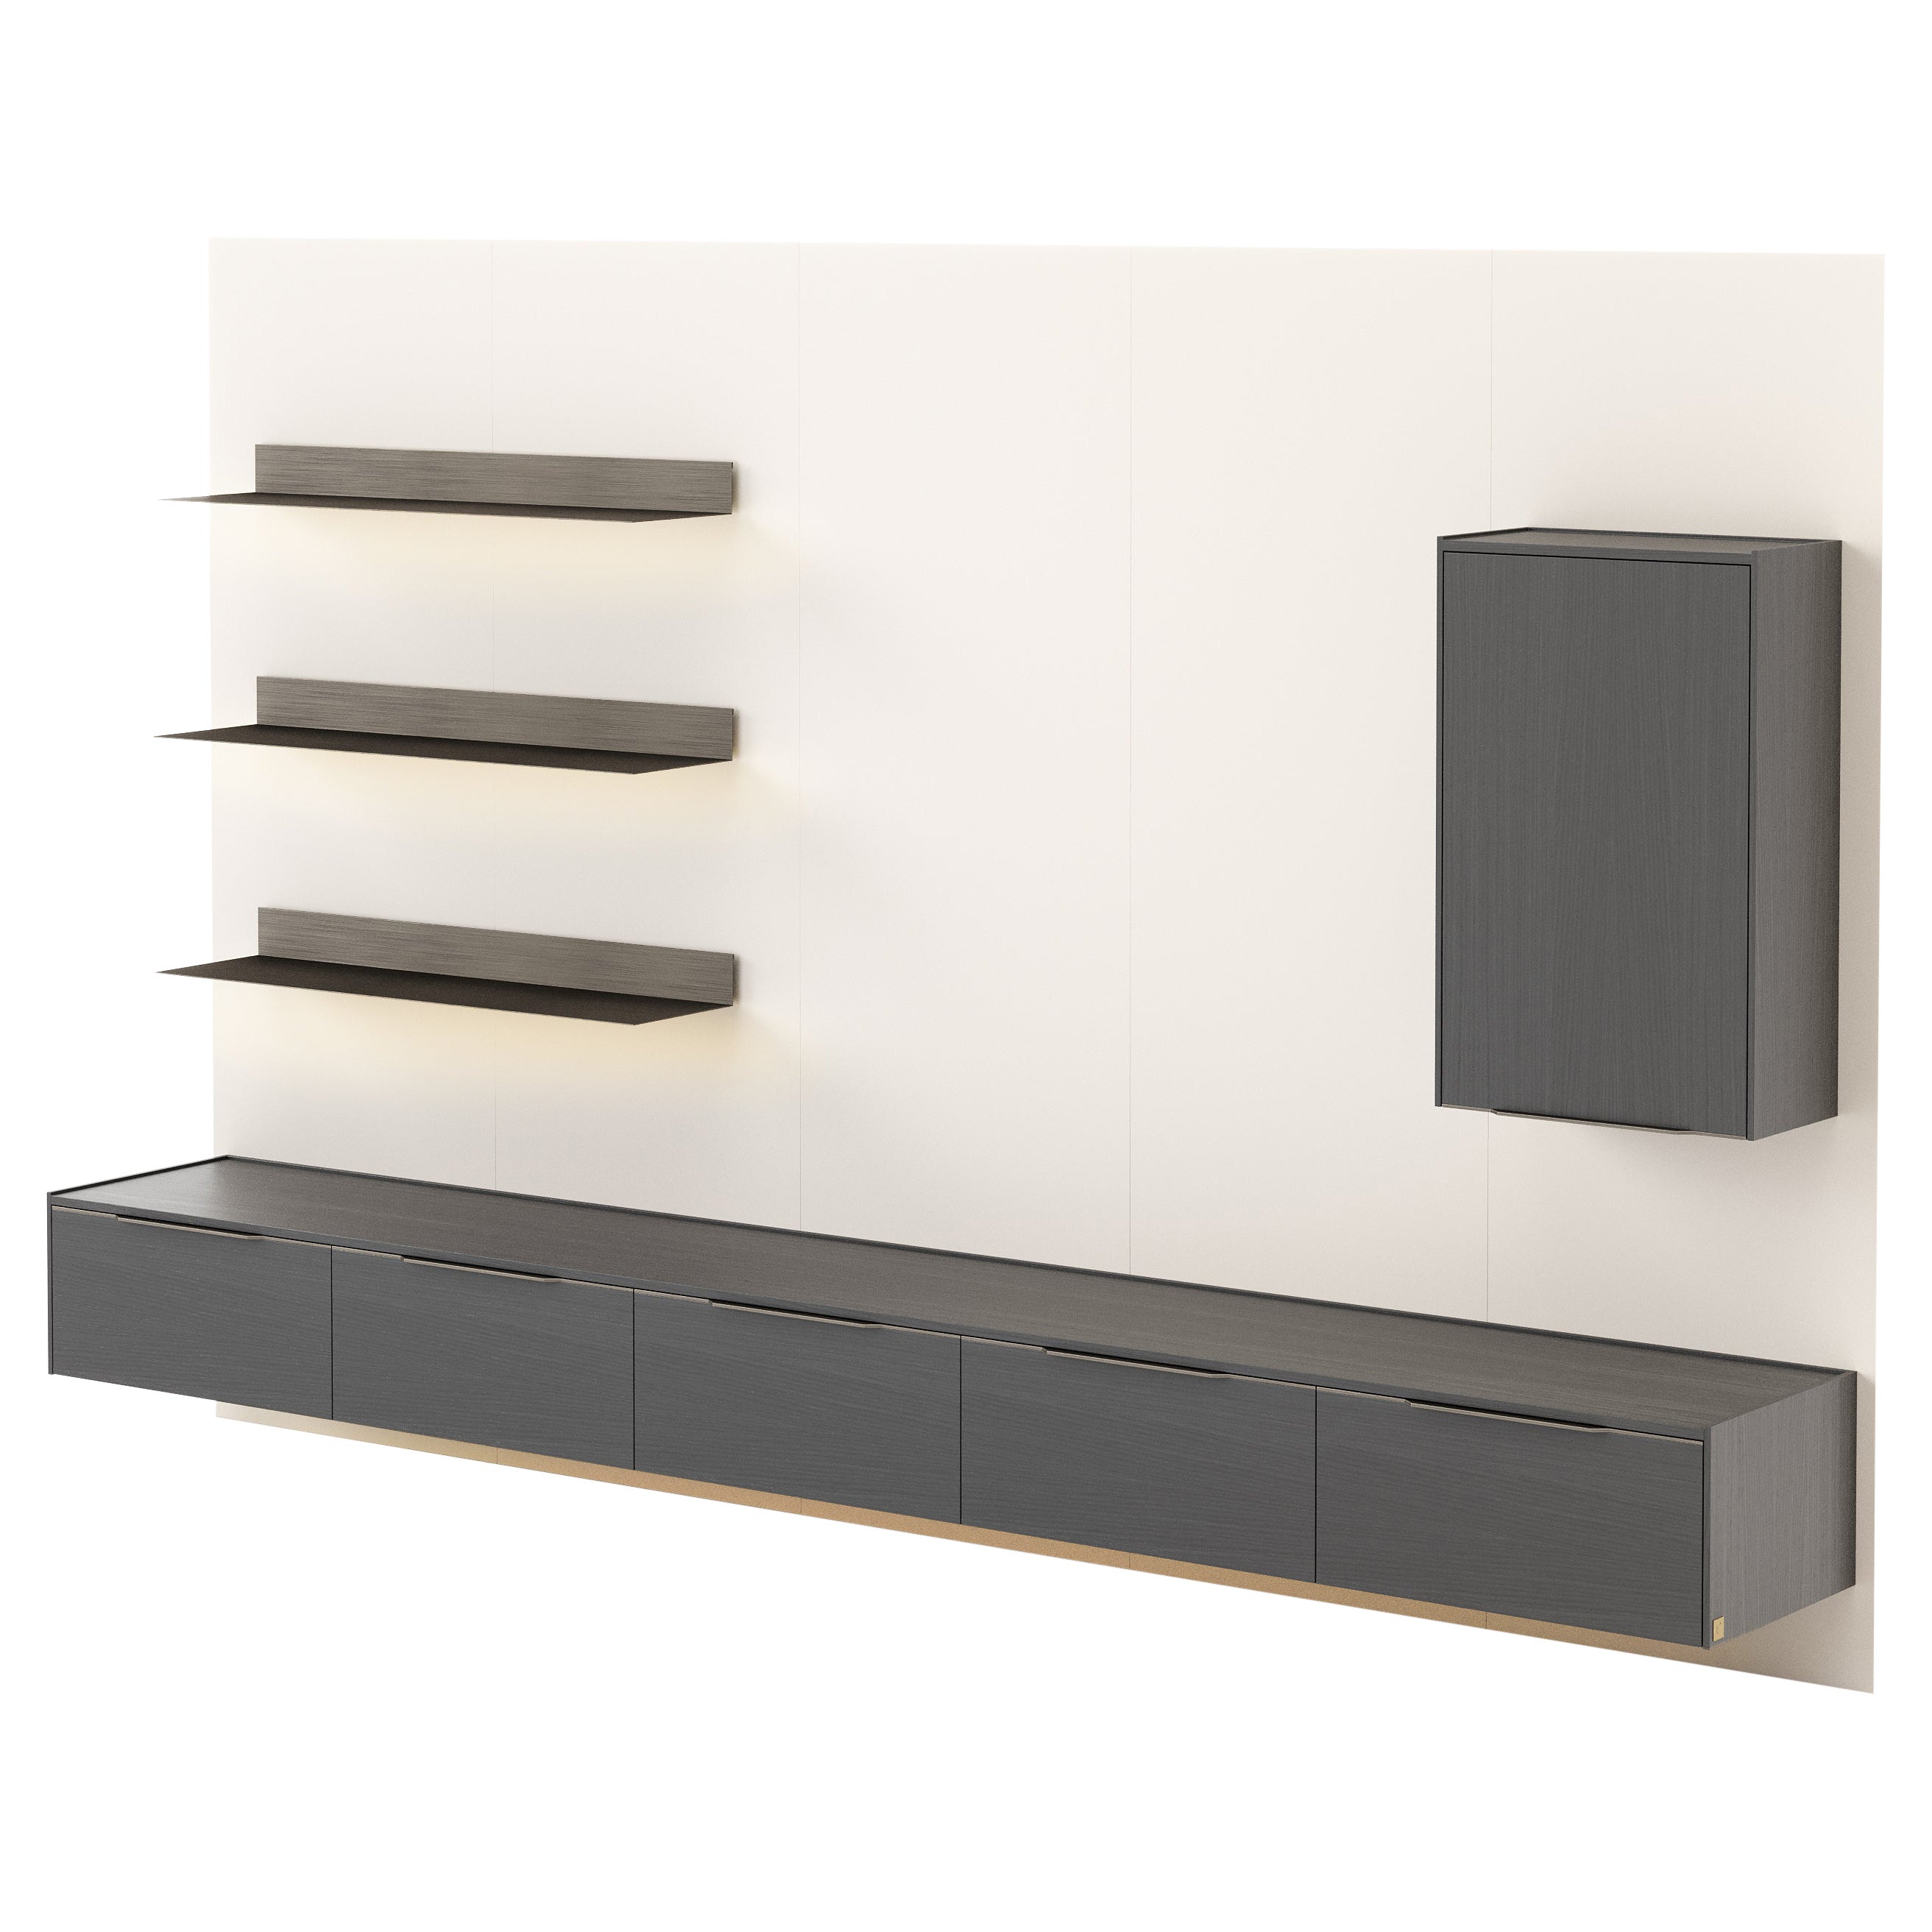 Modular Wall Unit Landform Day System 2 with TV Cabinet Made with Oak For Sale